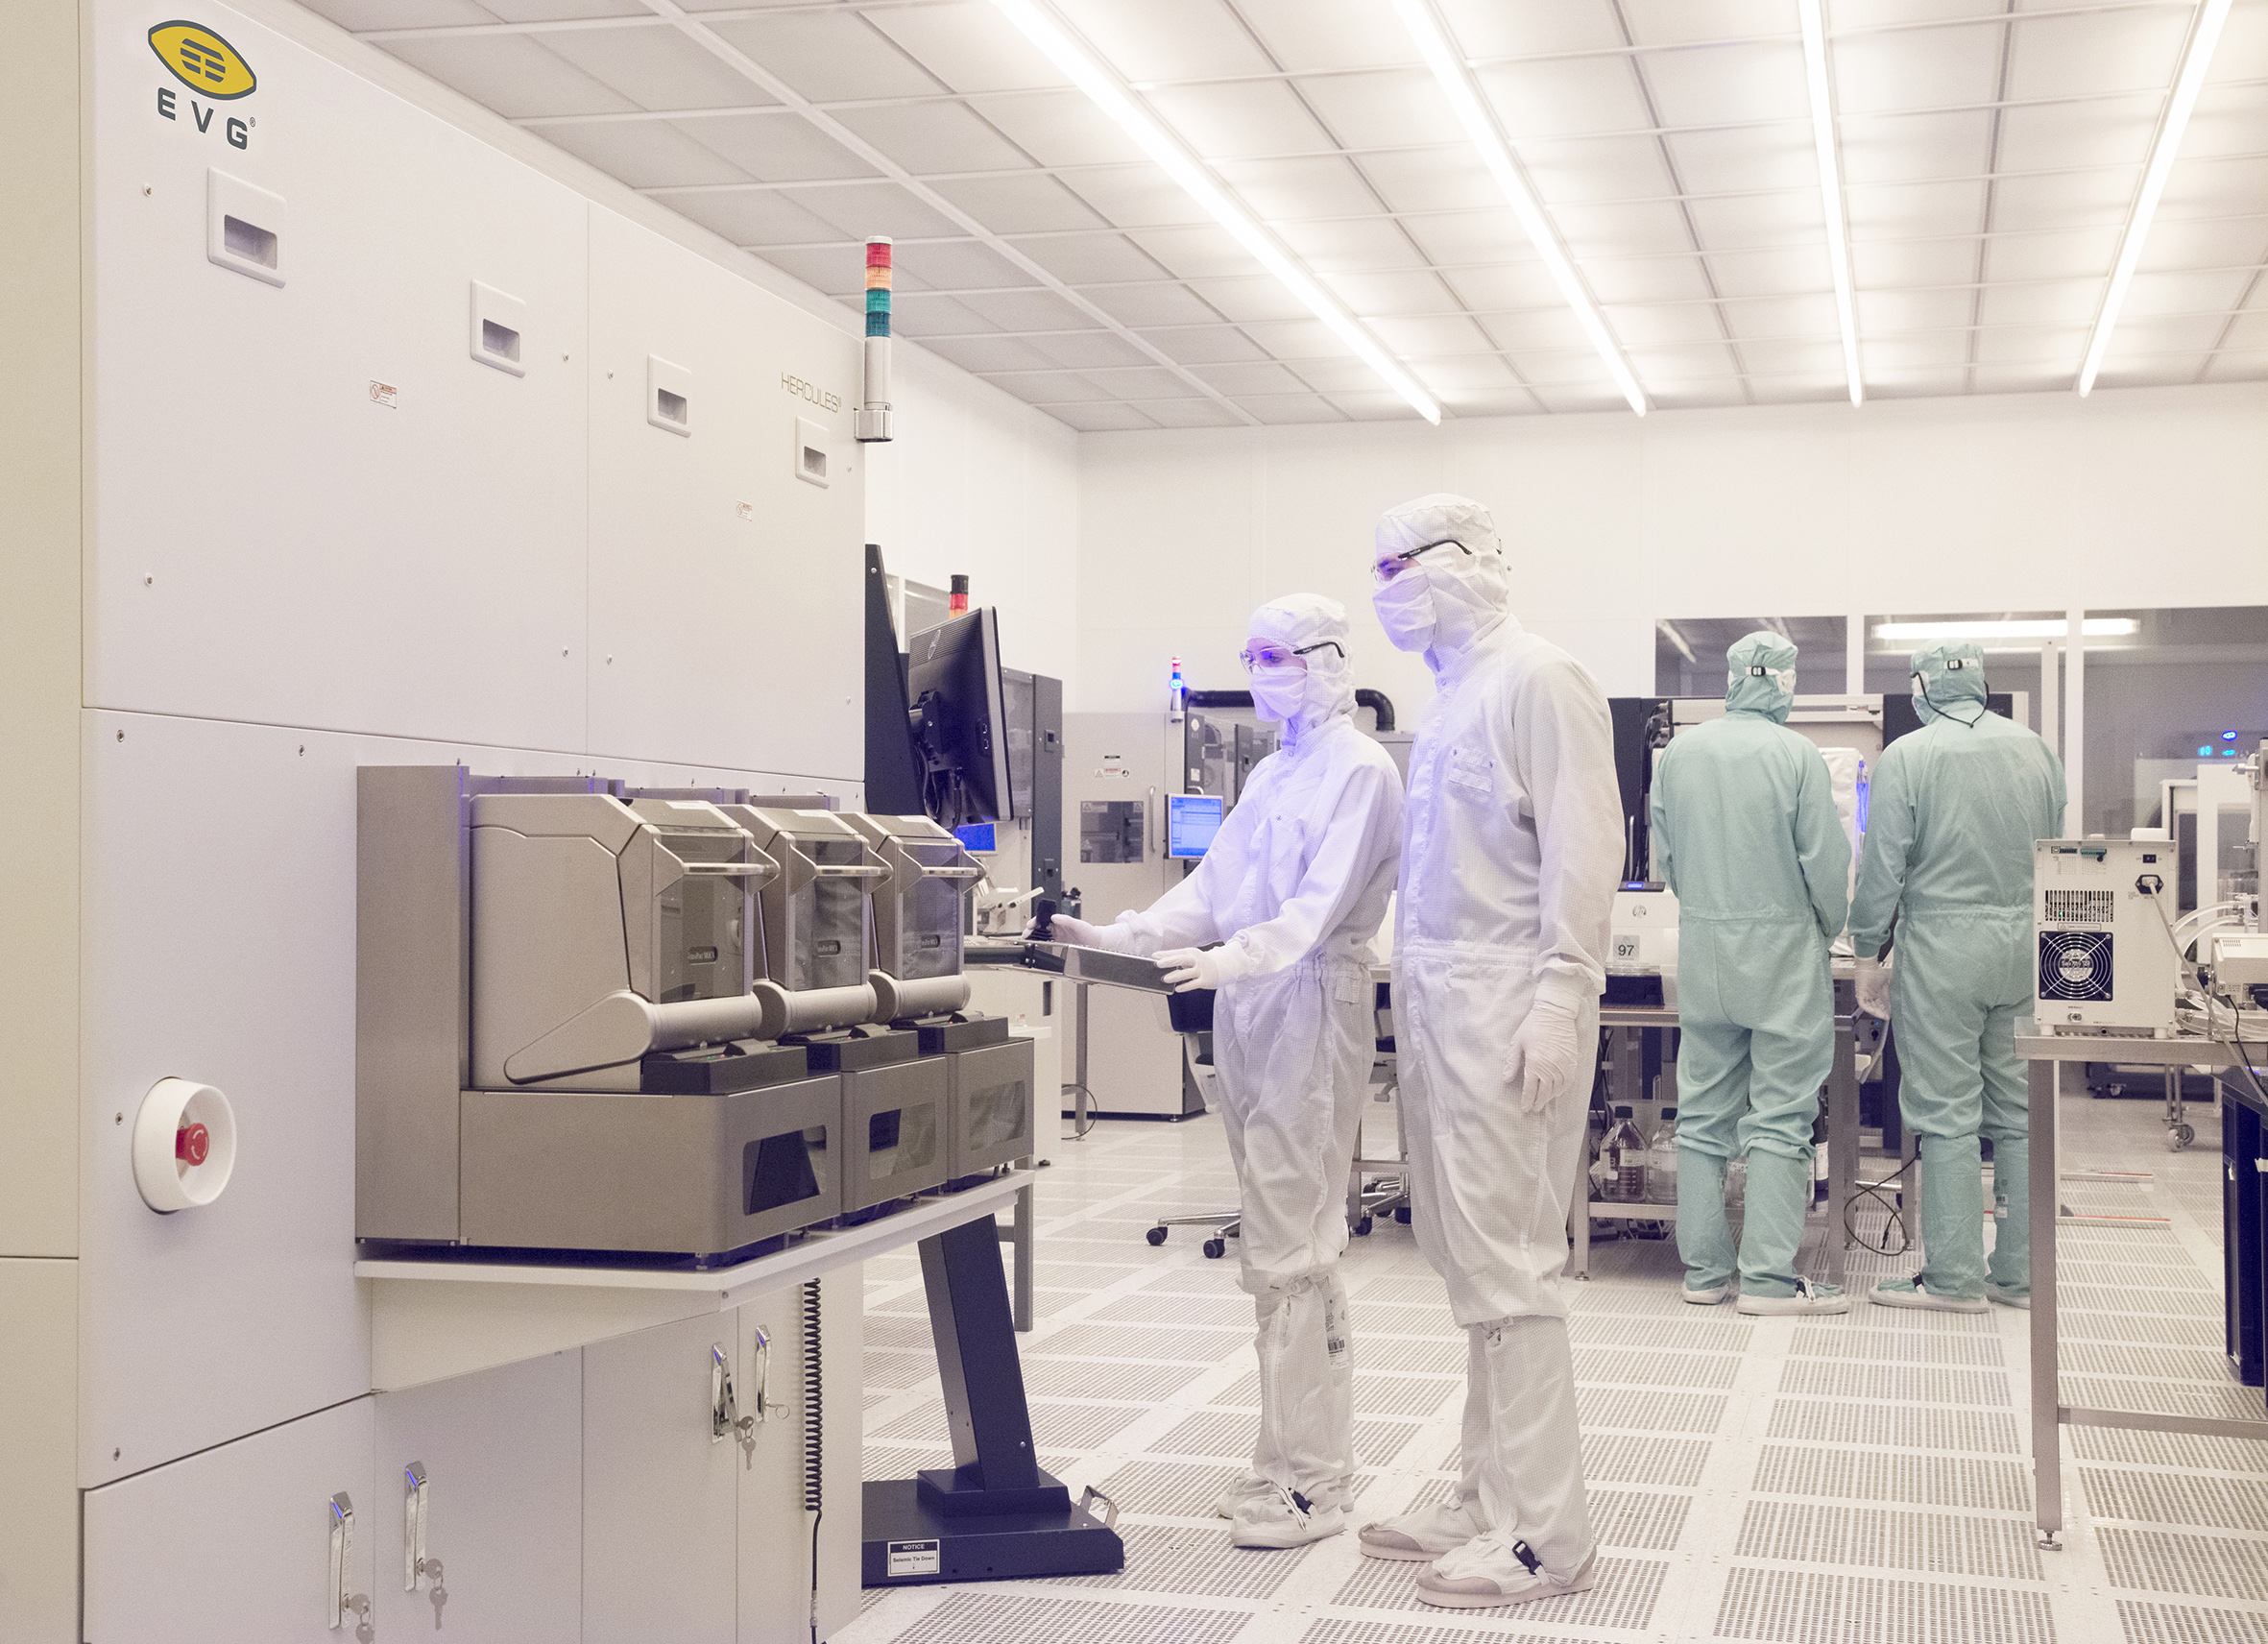 EVG's state-of-the art cleanroom facilities for process development